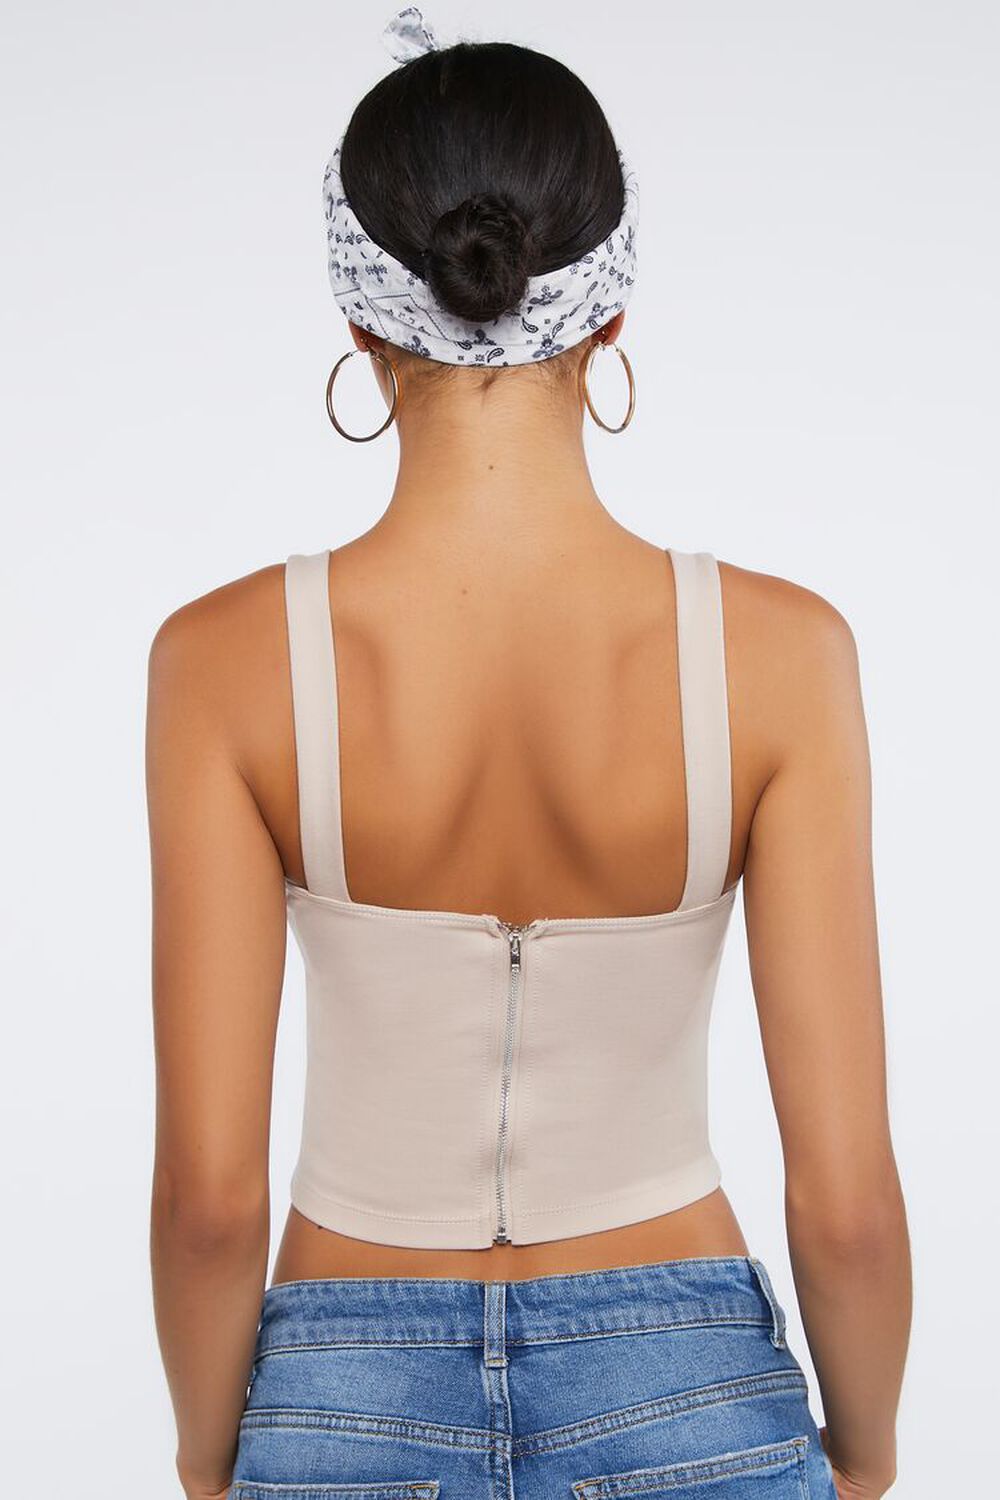 TAUPE Sweetheart Bustier Crop Top, image 3